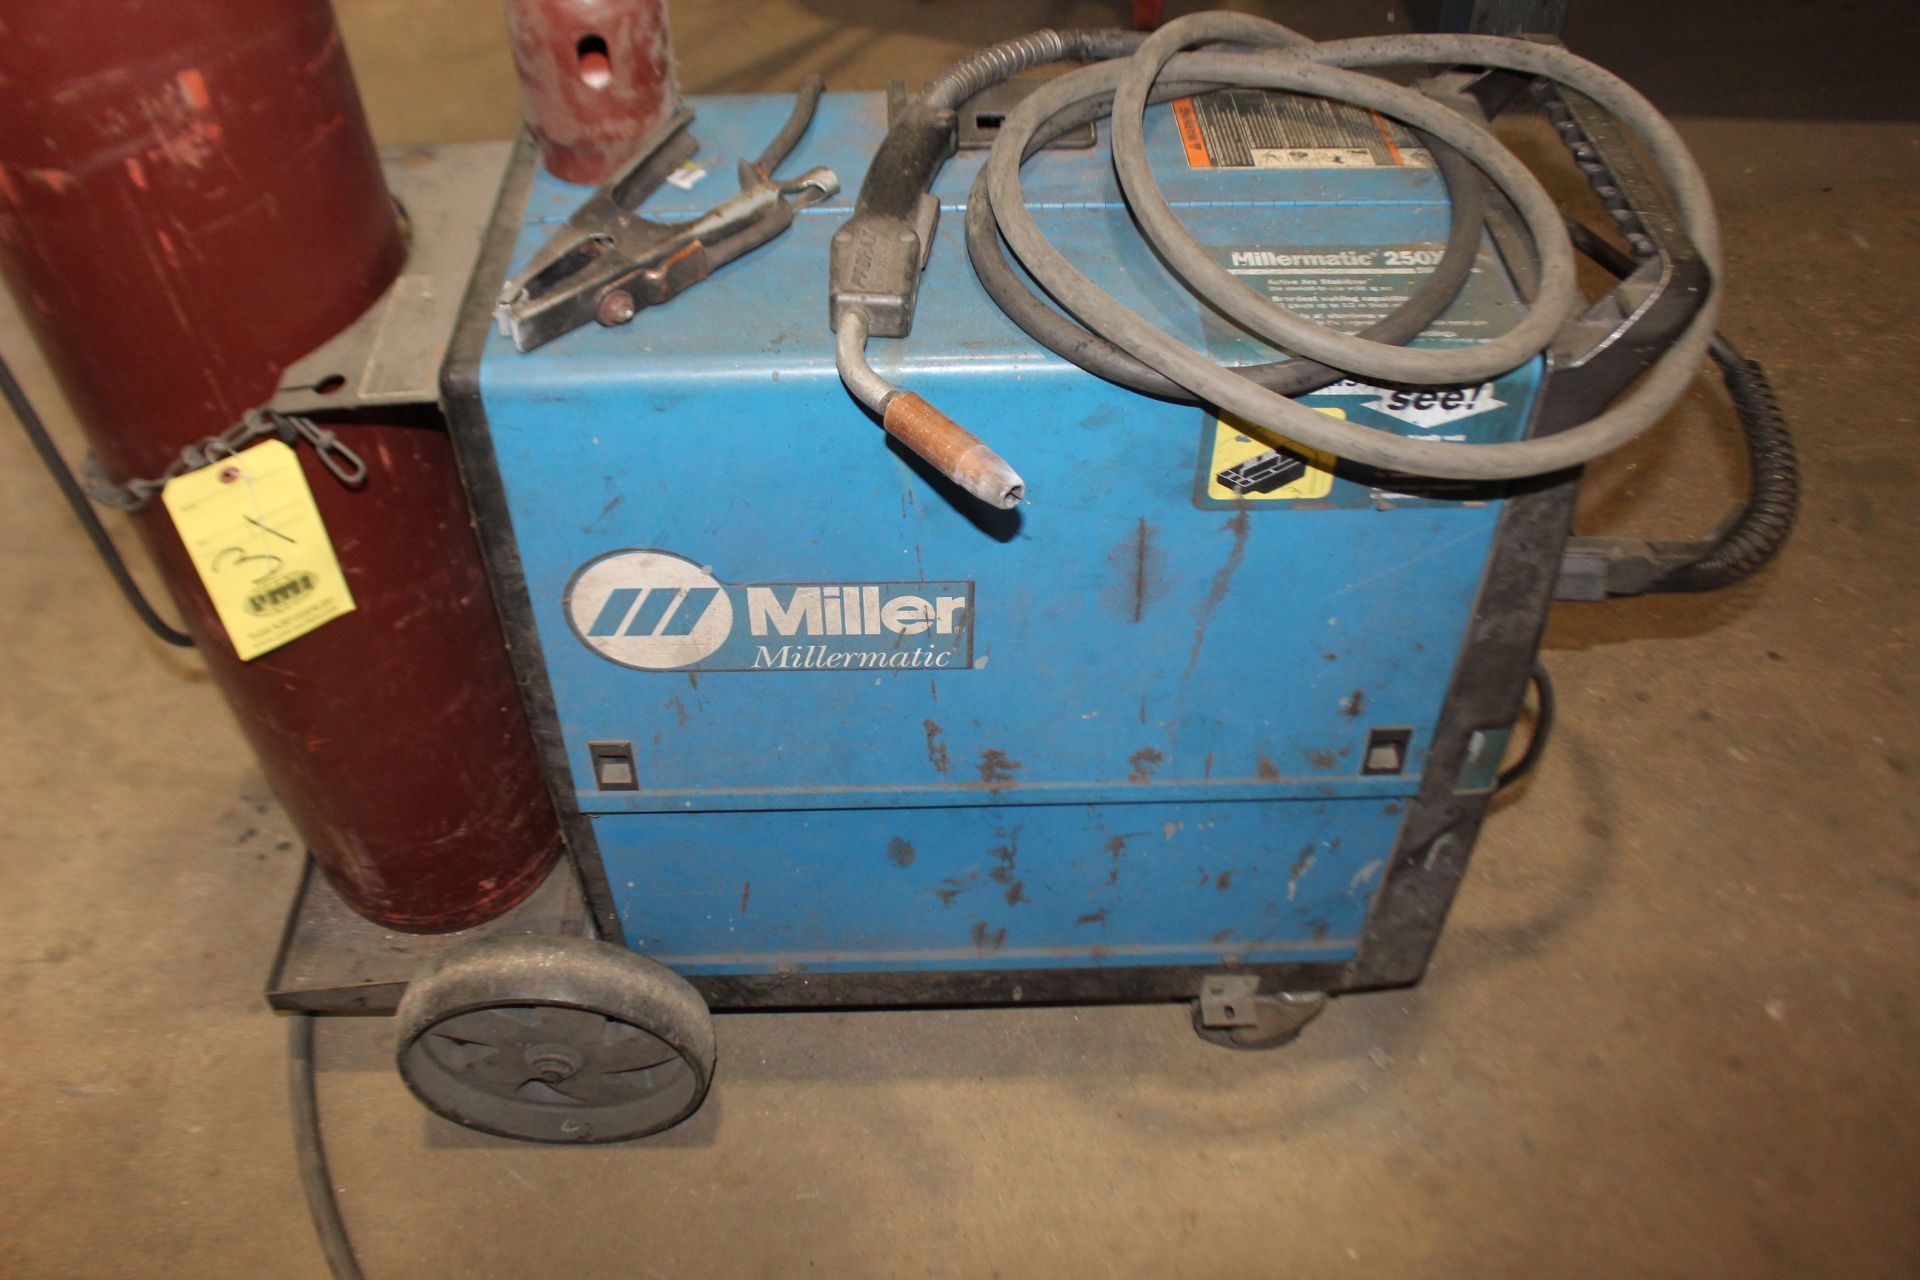 WELDER, MILLER MILLERMATIC 250, S/N LB018965 (Location #1: Tyco Air Products, Inc., 17309 Hufsmith